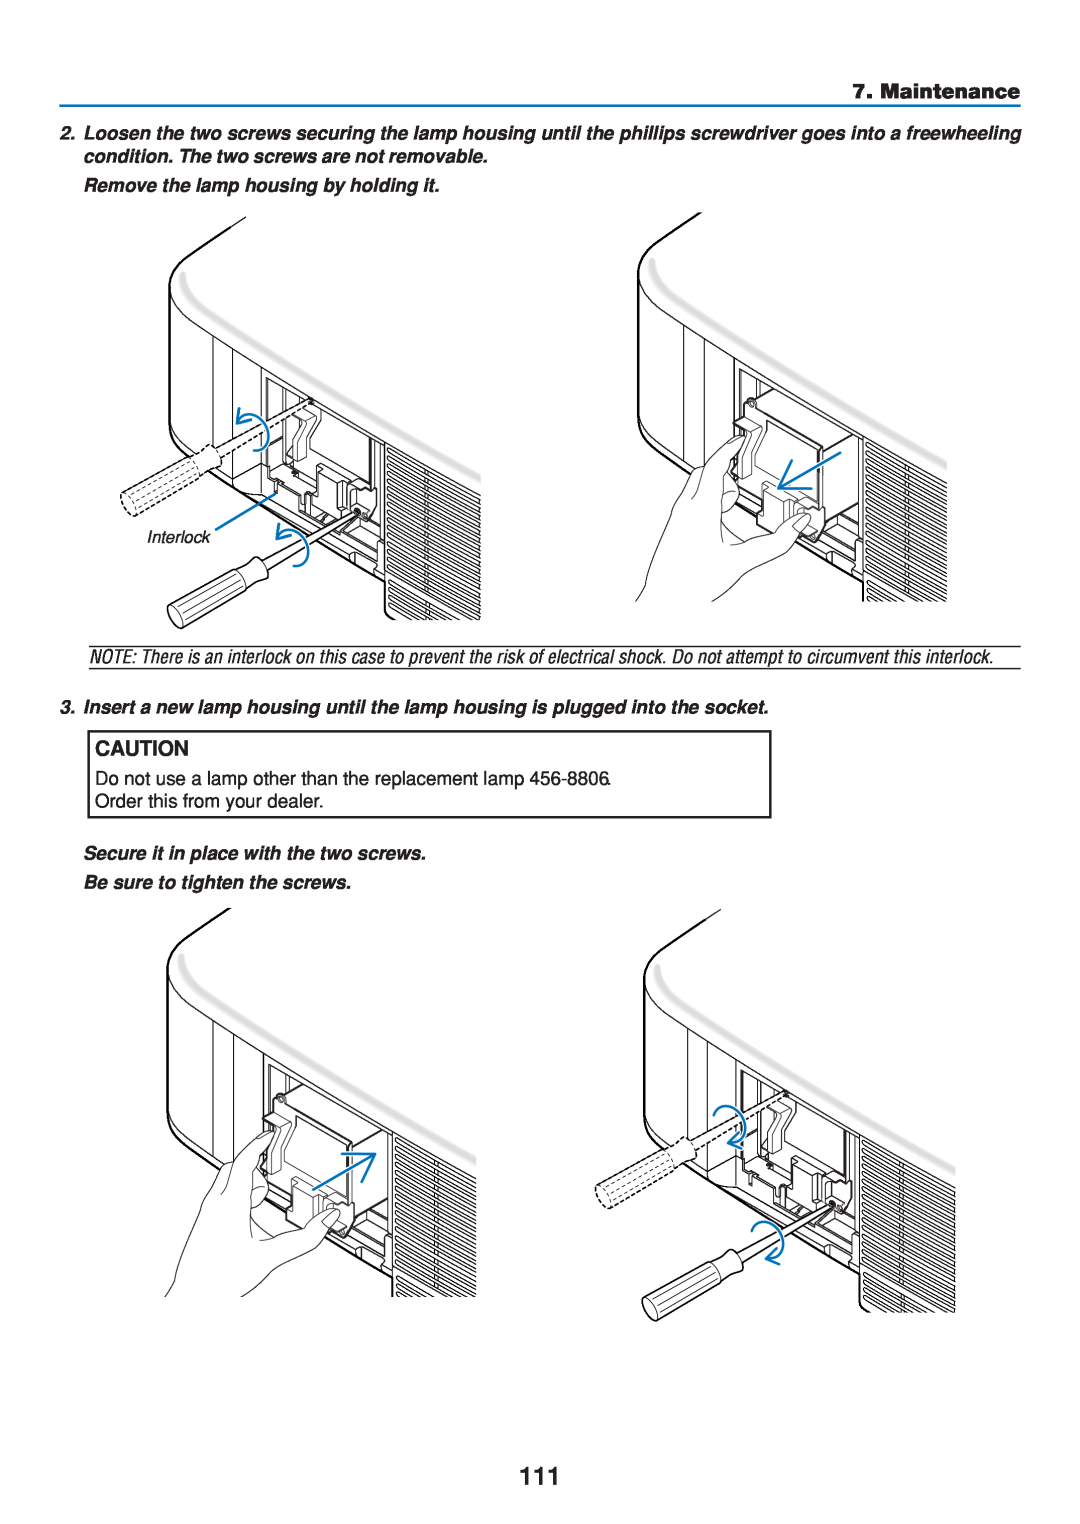 Dukane 8808 user manual Maintenance, Remove the lamp housing by holding it 